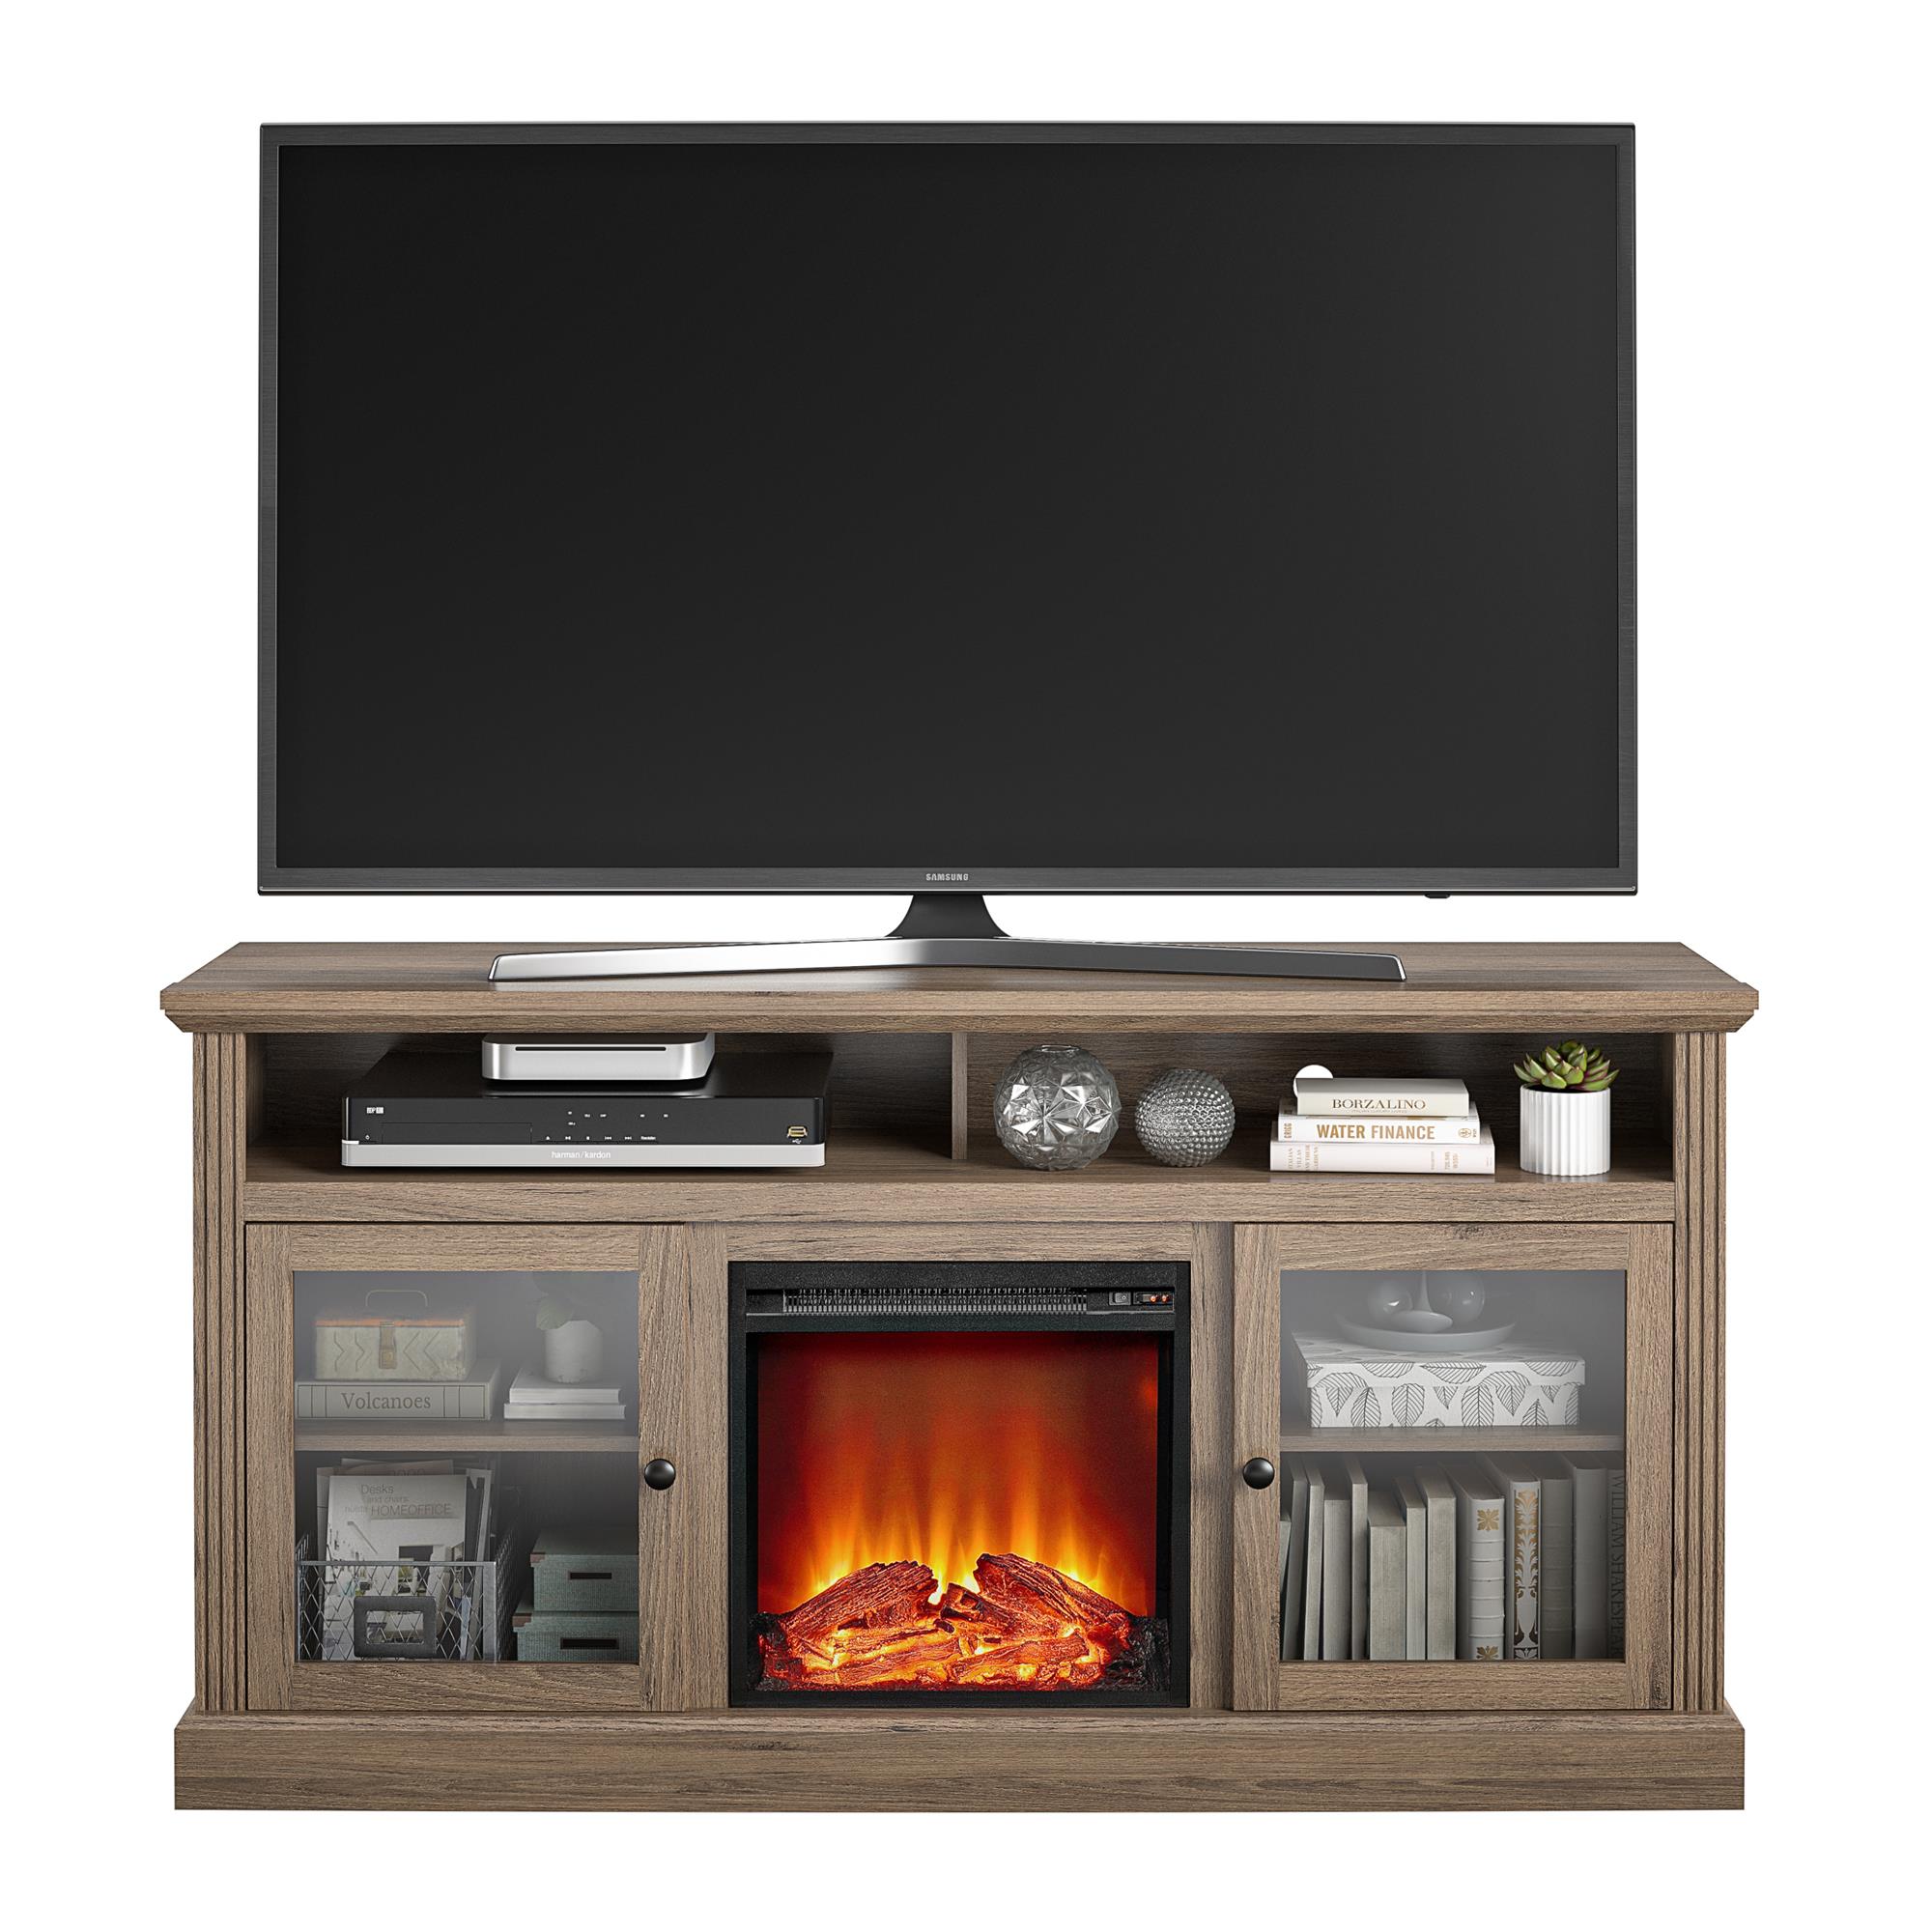 Ameriwood Home Leesburg Fireplace TV Stand for TVs up to 65", Rustic Oak - image 3 of 9